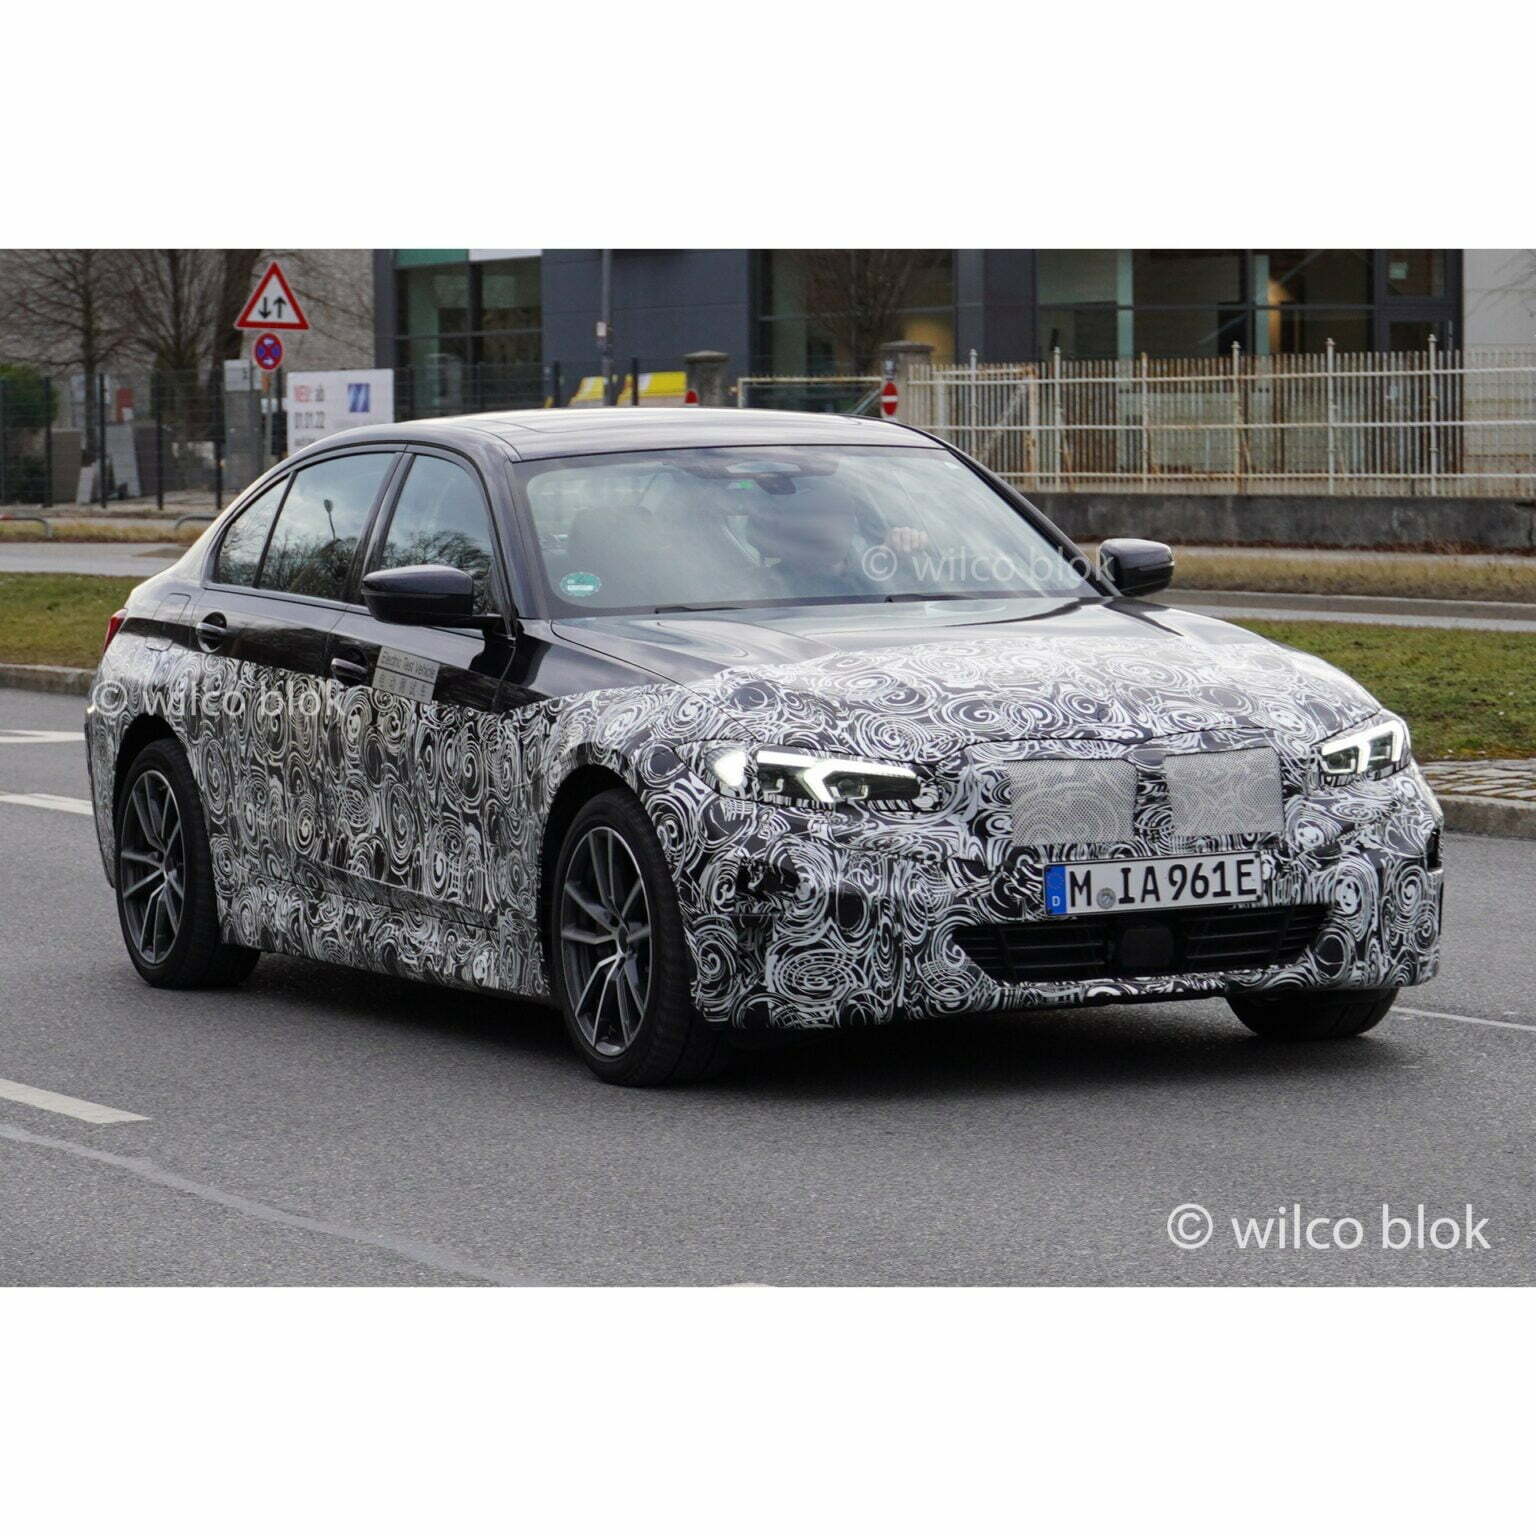 BMW i3 Electric Sedan Spotted Testing For The First Time